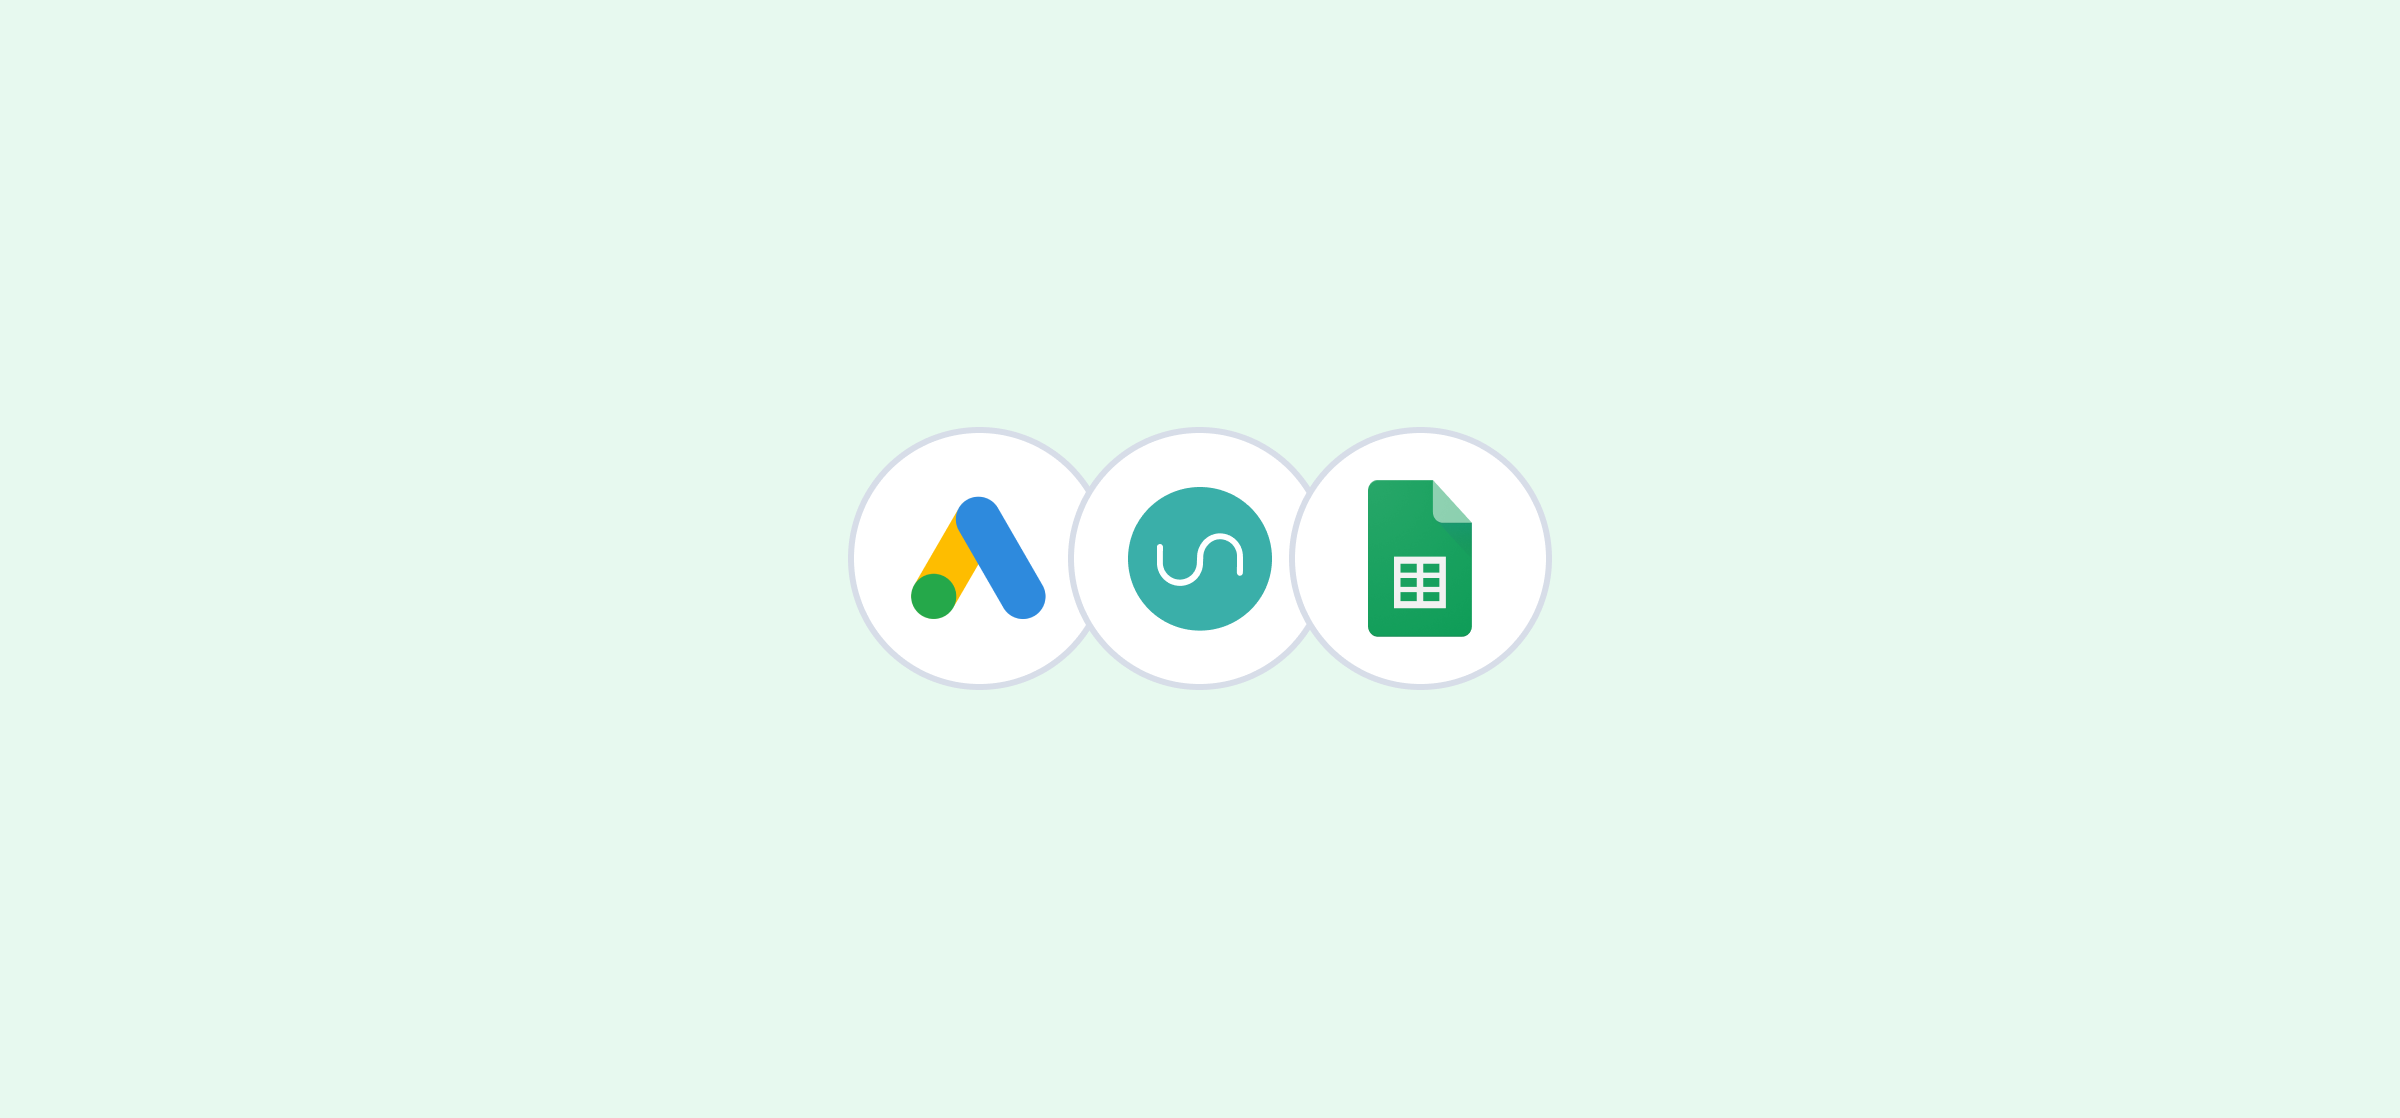 Logos for Google Ads, Unito, and Google Sheets, representing a Google Ads Budget Pacing Dashboard template.